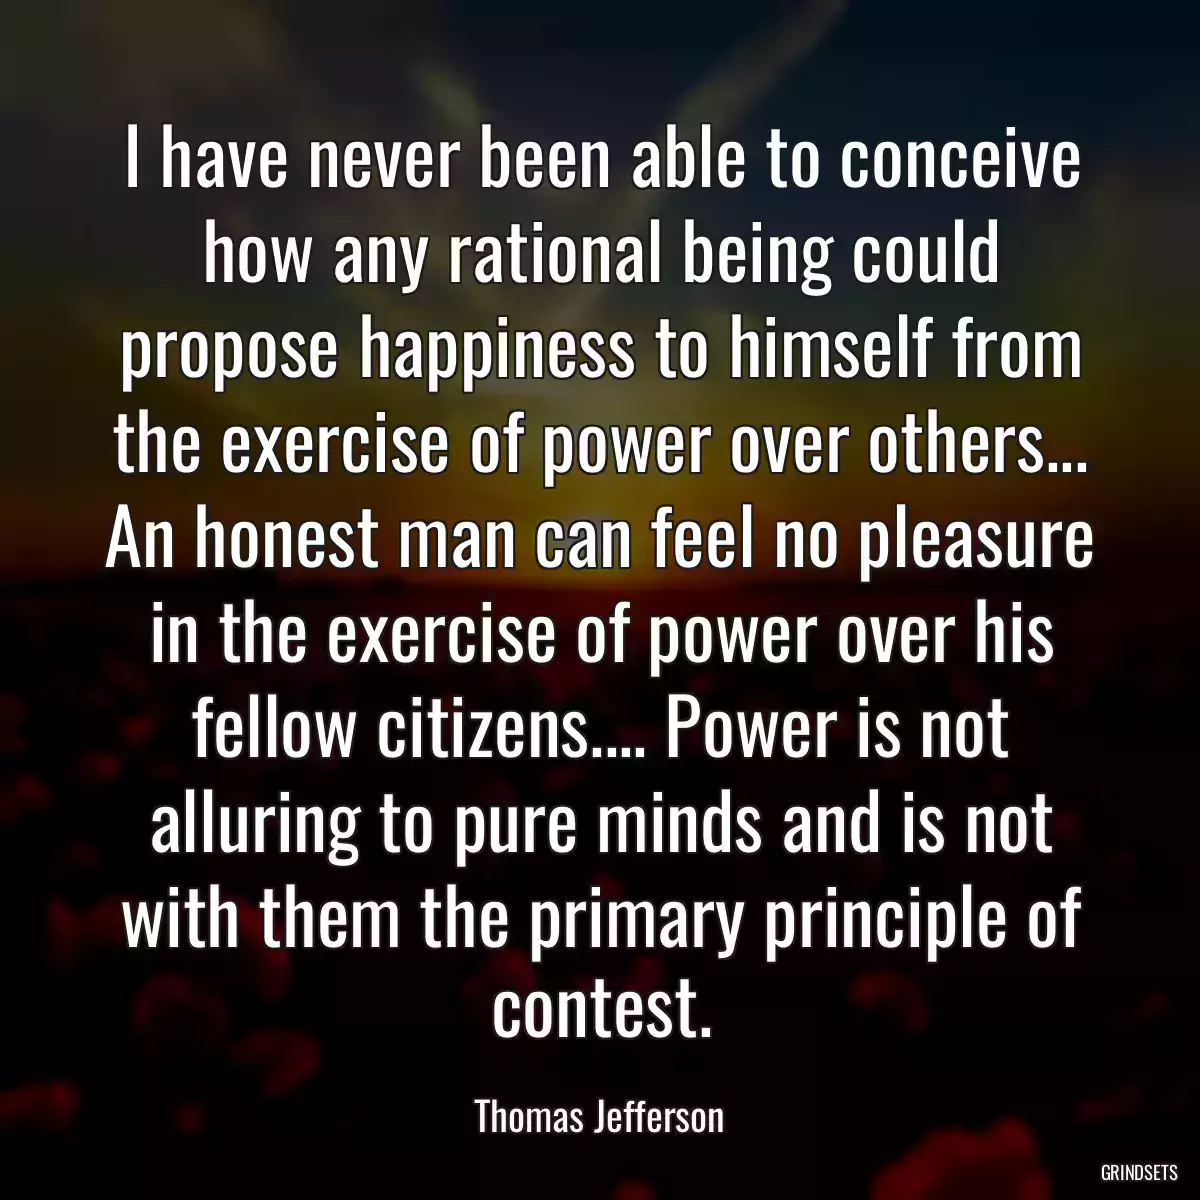 I have never been able to conceive how any rational being could propose happiness to himself from the exercise of power over others... An honest man can feel no pleasure in the exercise of power over his fellow citizens.... Power is not alluring to pure minds and is not with them the primary principle of contest.